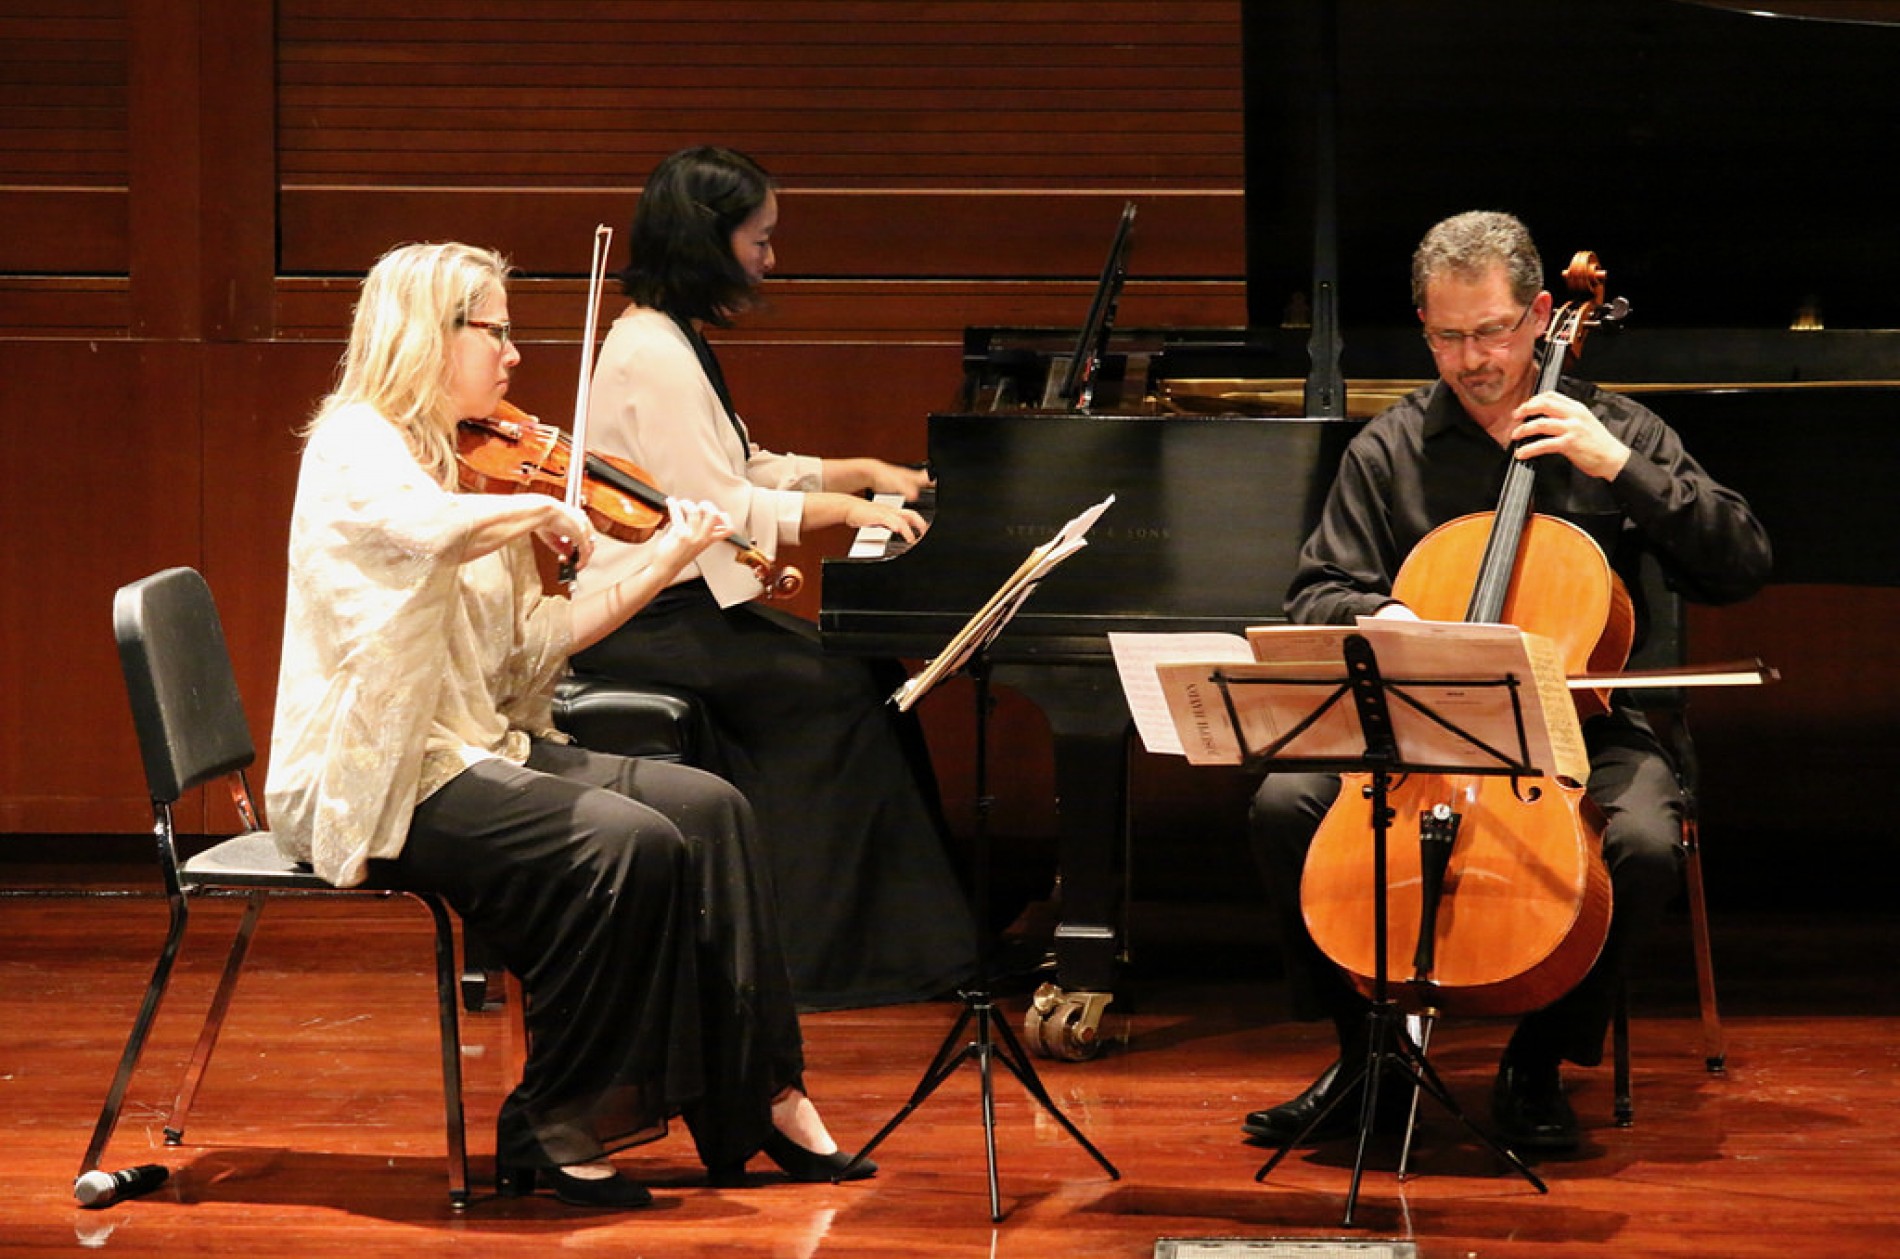 A chamber trio featuring a violinist, a pianist, and cellist performing onstage.